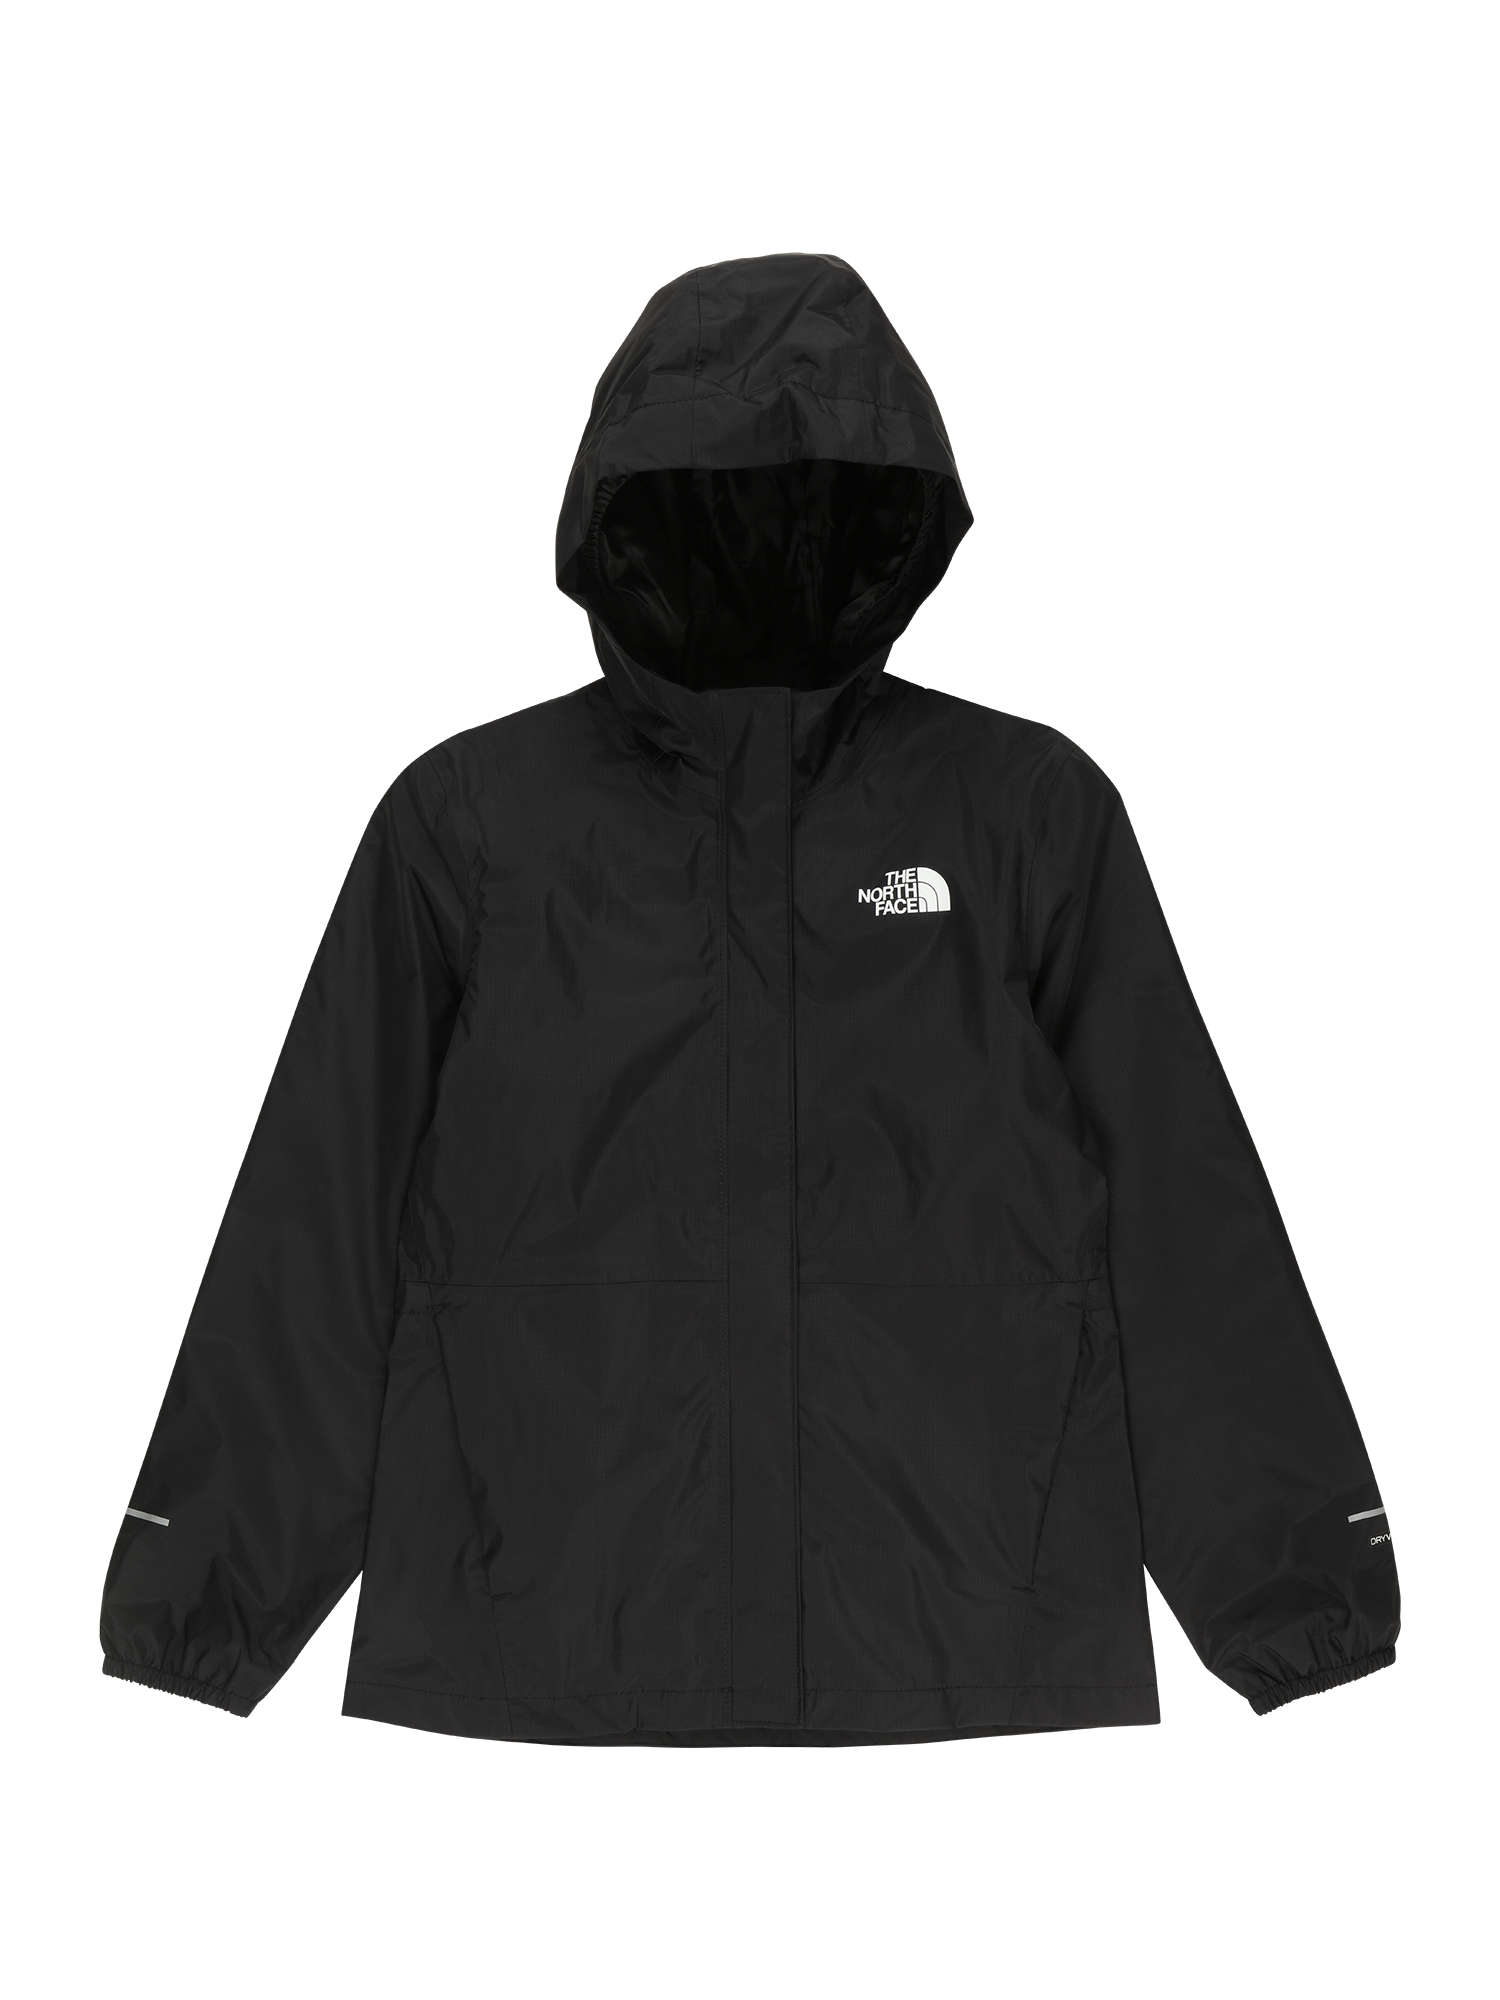 trvdl Bimba THE NORTH FACE Giacca per outdoor Resolve in Nero 